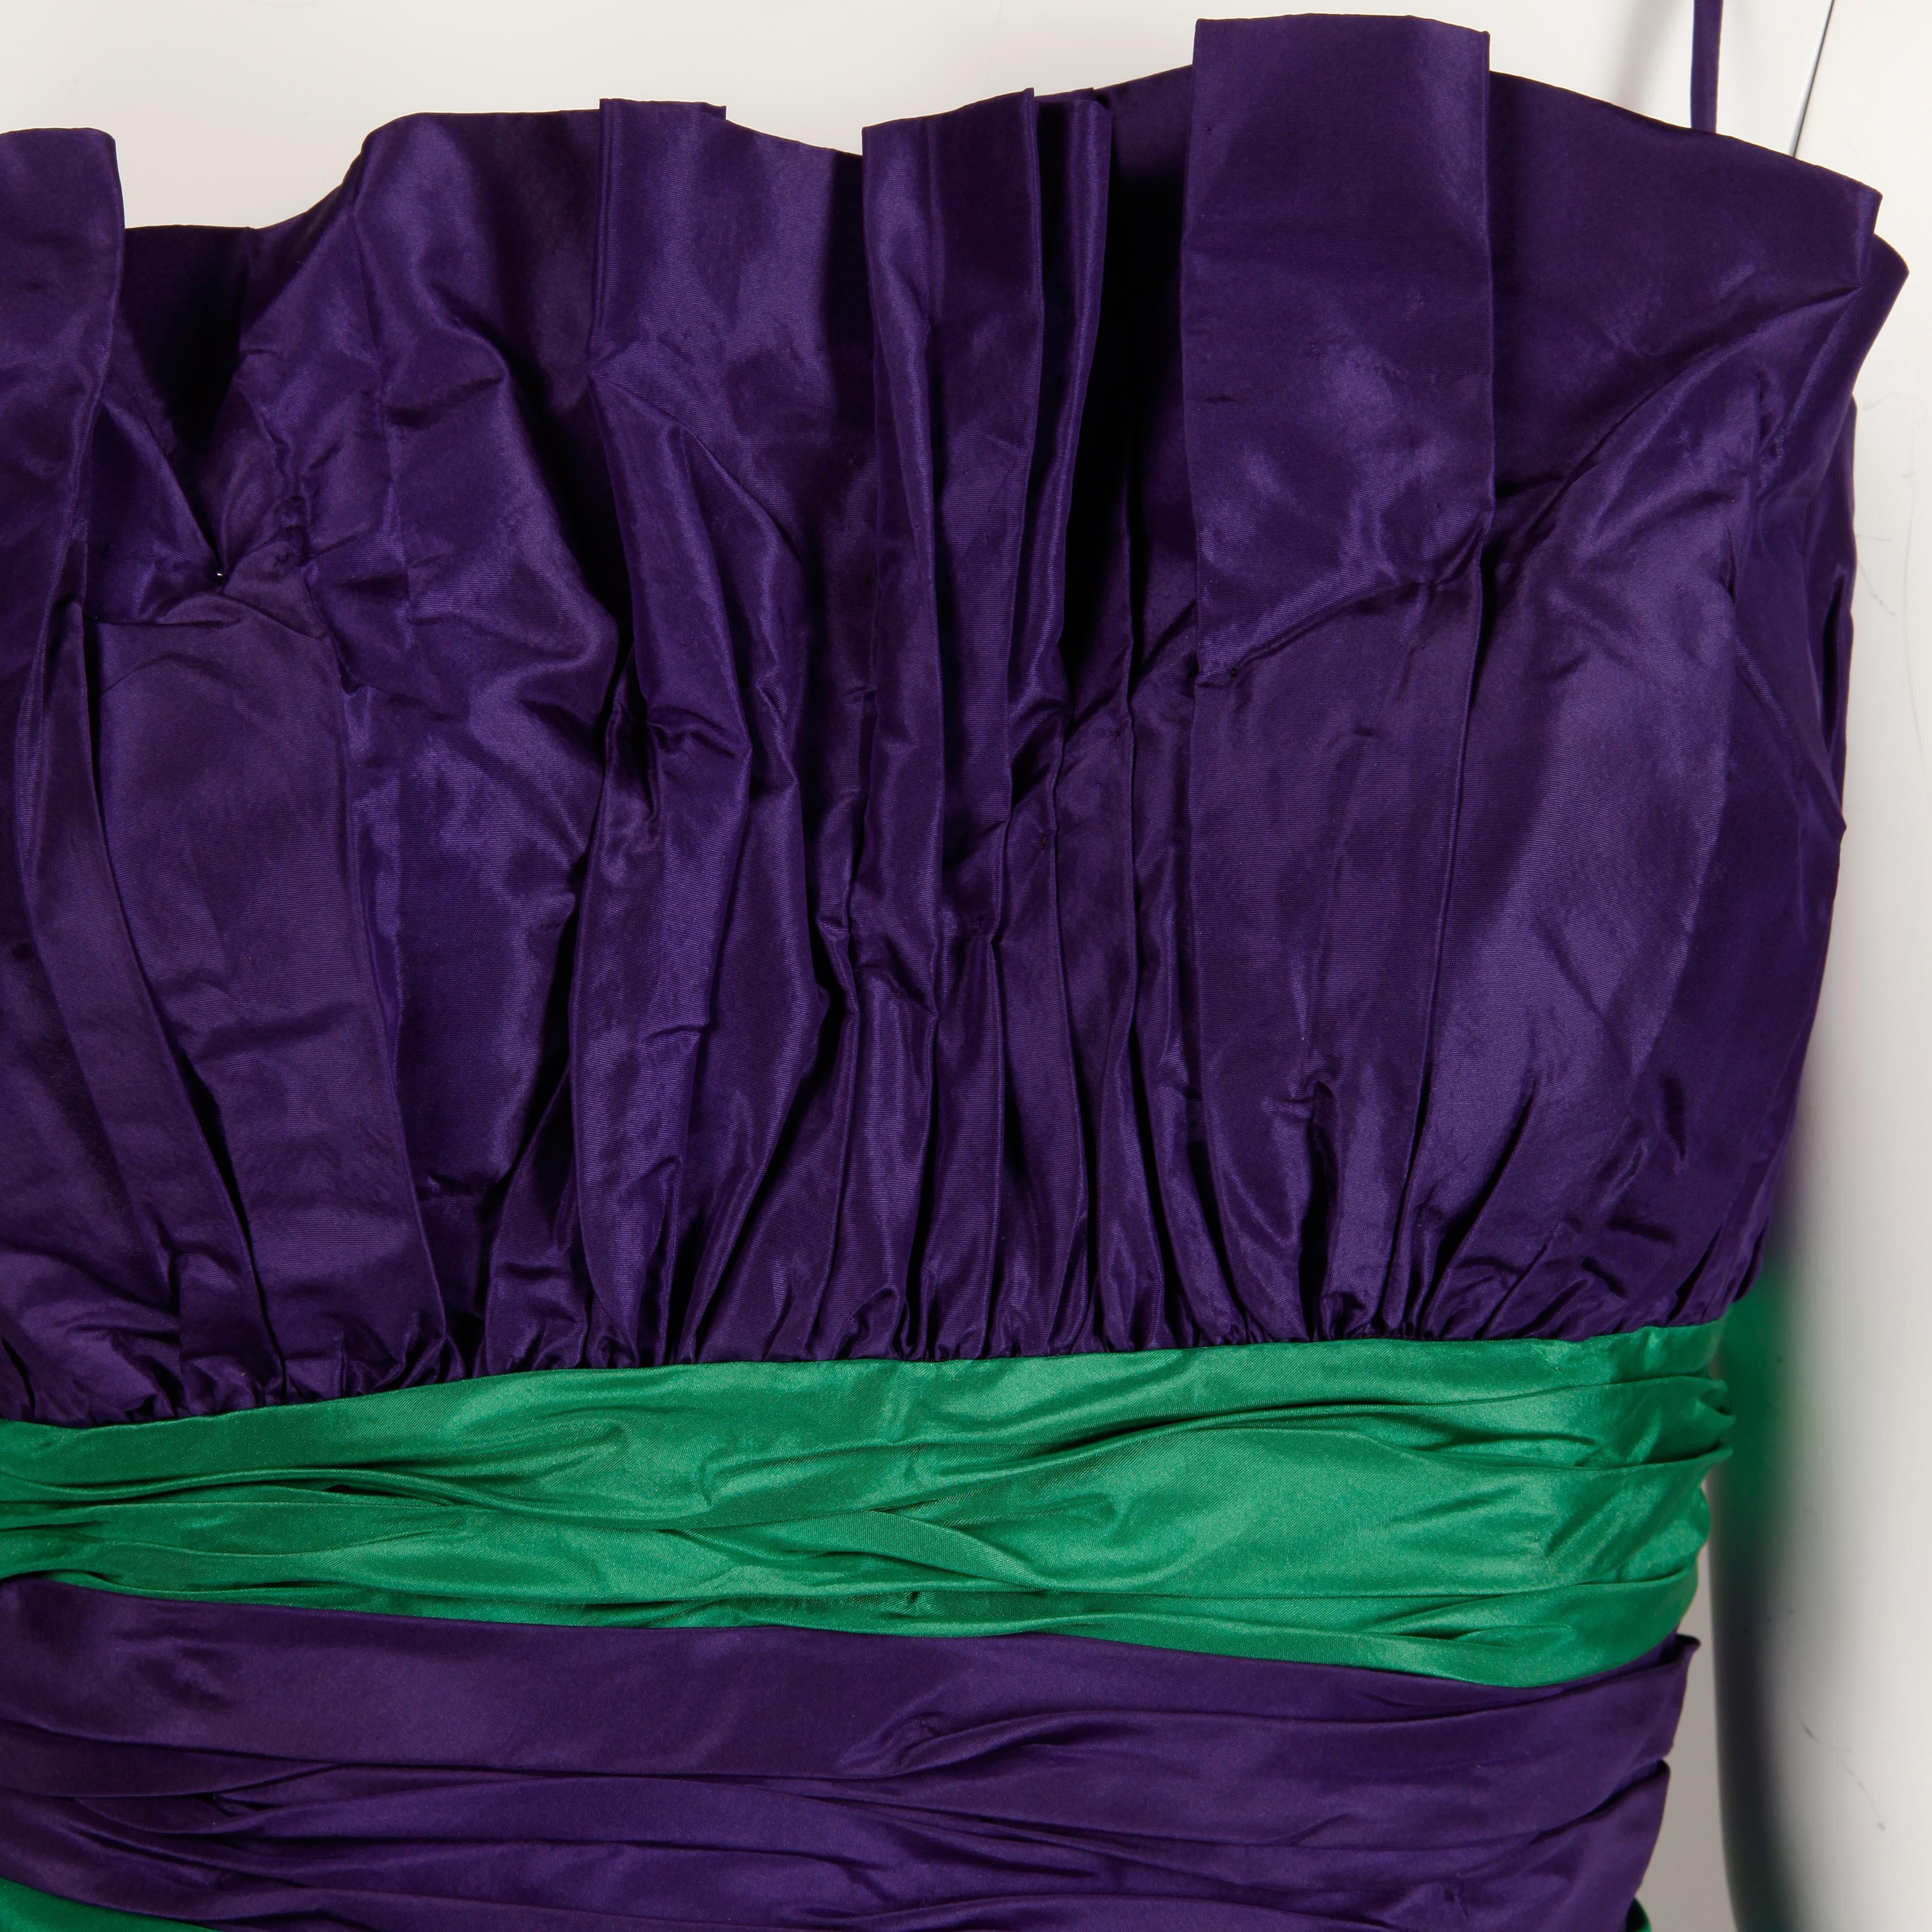 Loris Azzaro Vintage Purple + Green Silk Taffeta Evening Gown or Dress In Excellent Condition For Sale In Sparks, NV